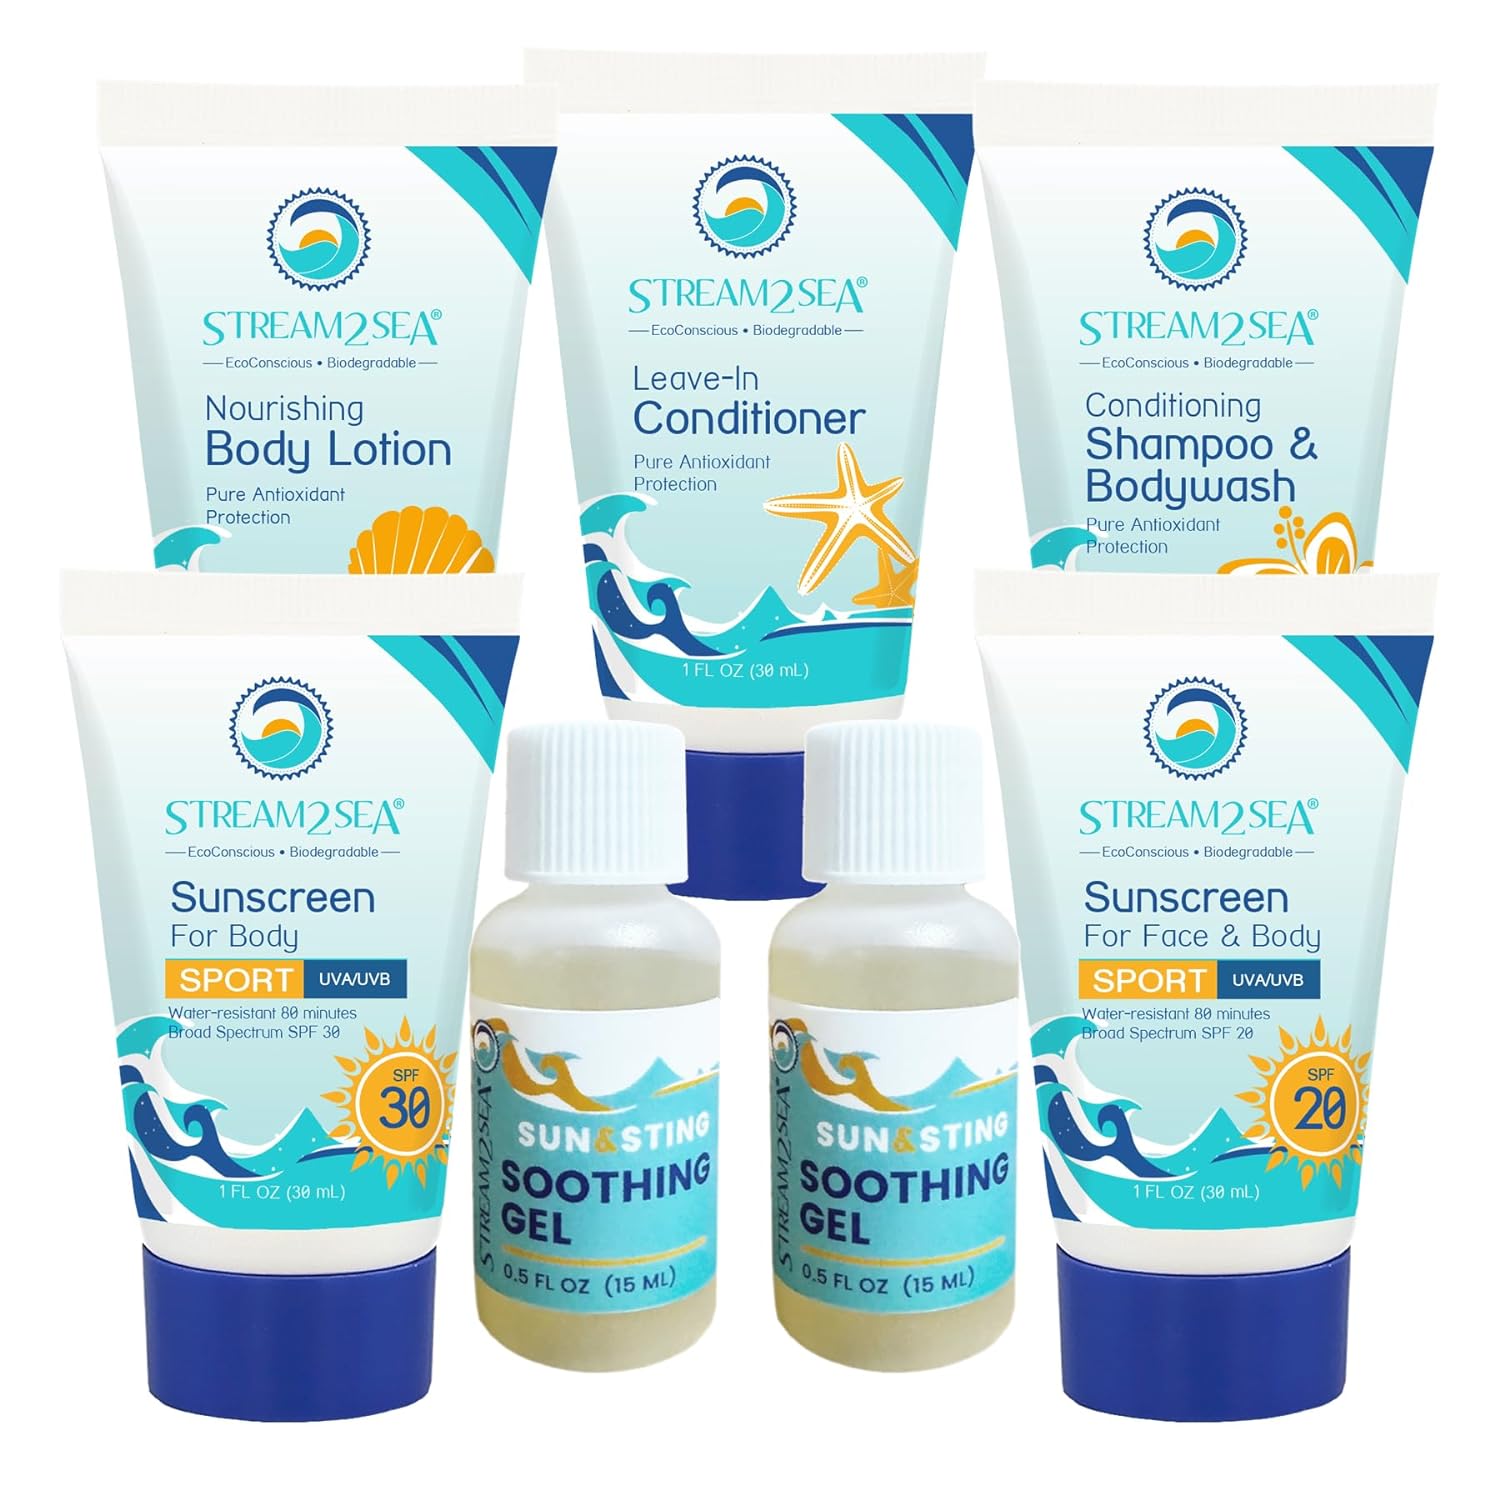 STREAM 2 SEA 6 Pack Natural Travel Sized Toiletries, 1oz Paraben Free Sample Size Shampoo, Conditioner, Lotion, Mineral Sunscreen SPF 20 and SPF 30 and After Sun Gel